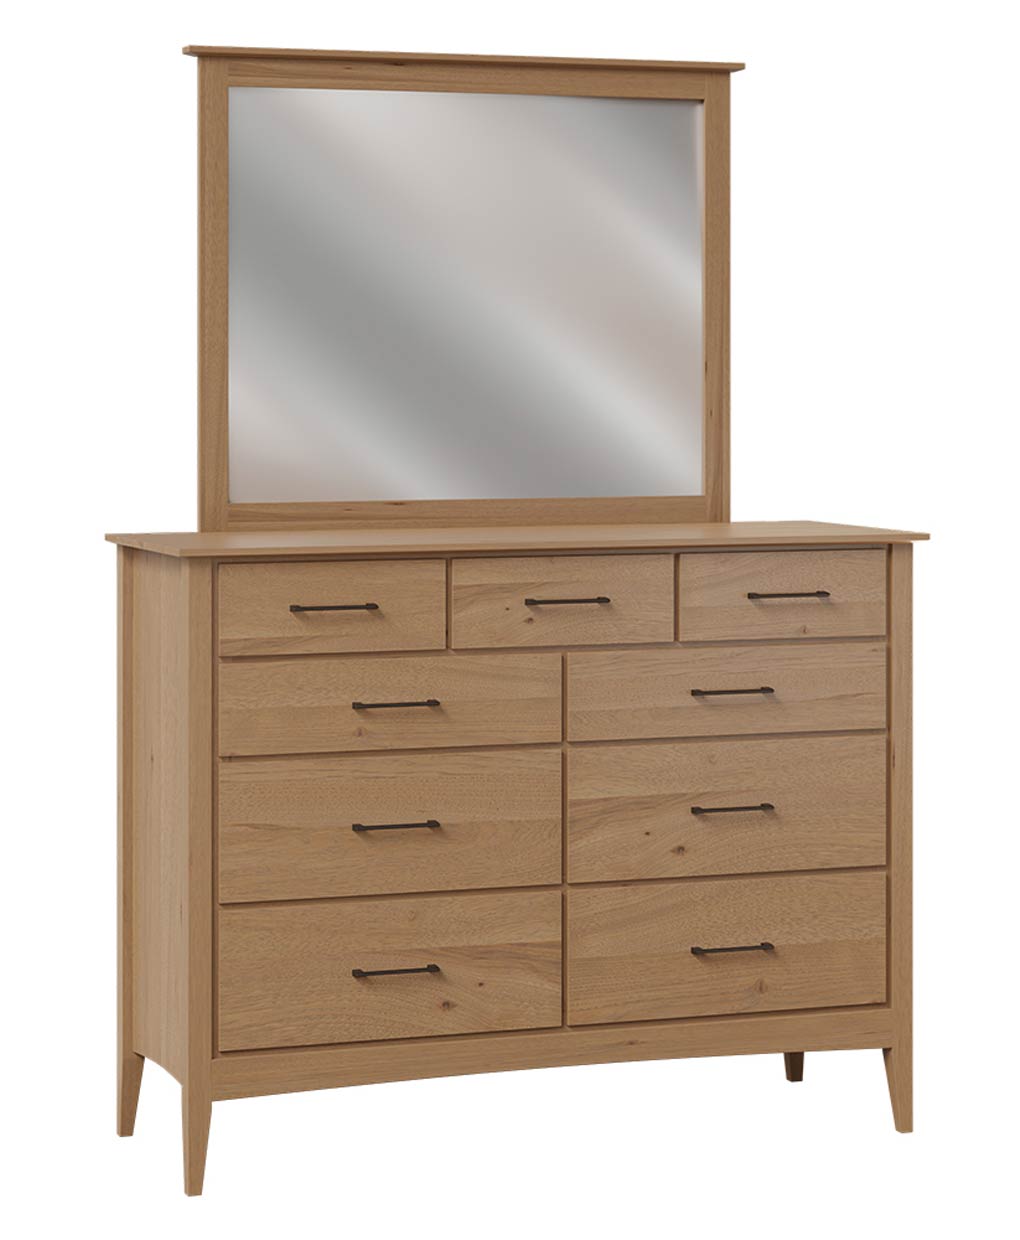 Amish Atlantic 9 Drawer Dresser [Shown with JRAL-030 Mirror in Rustic Hickory with a Tundra finish]